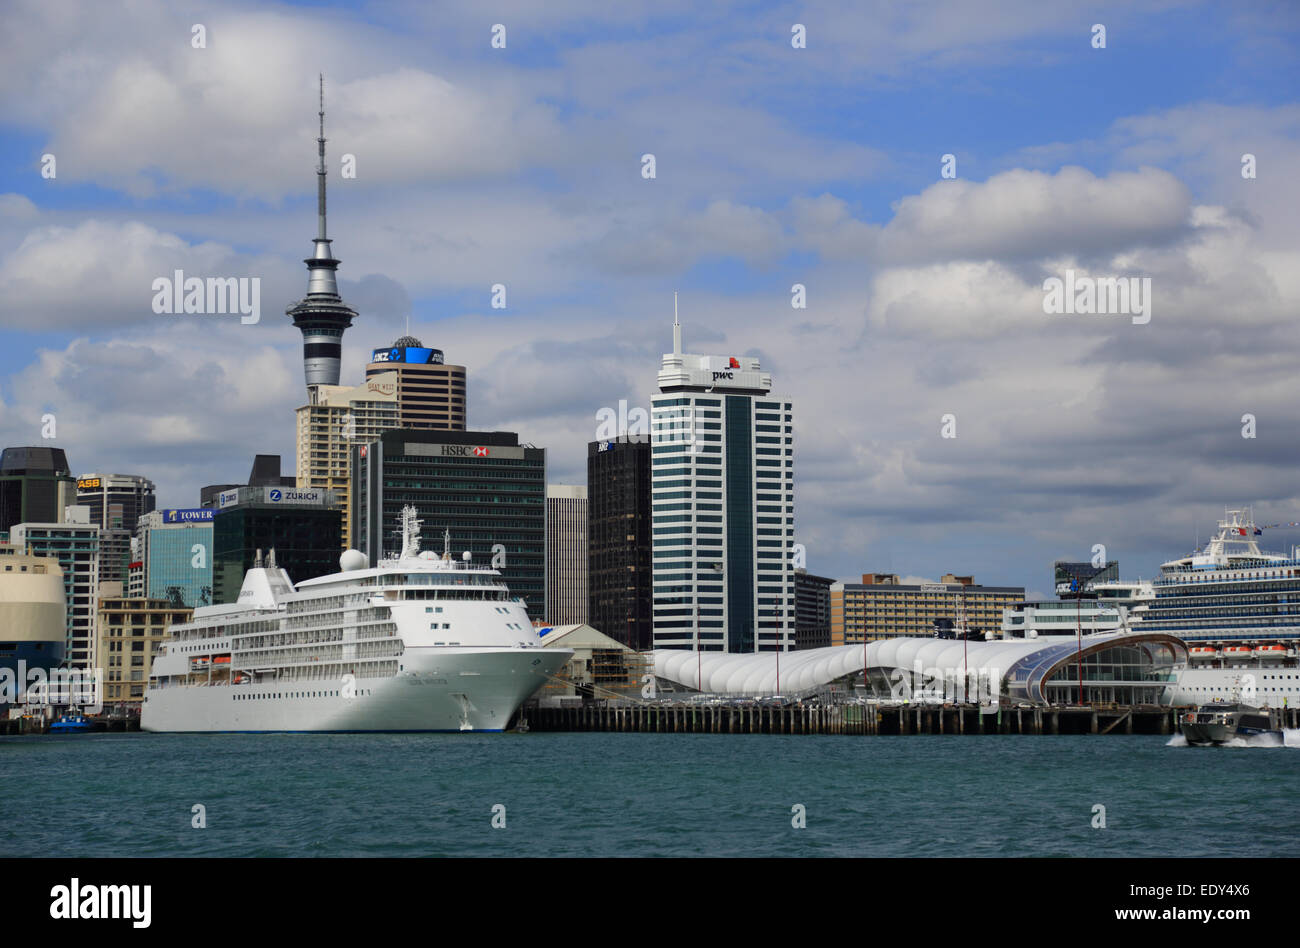 Auckland Port and skyline, Diamond Princess cruise ship and other shipping from Devenport Ferry, New Zealand Stock Photo